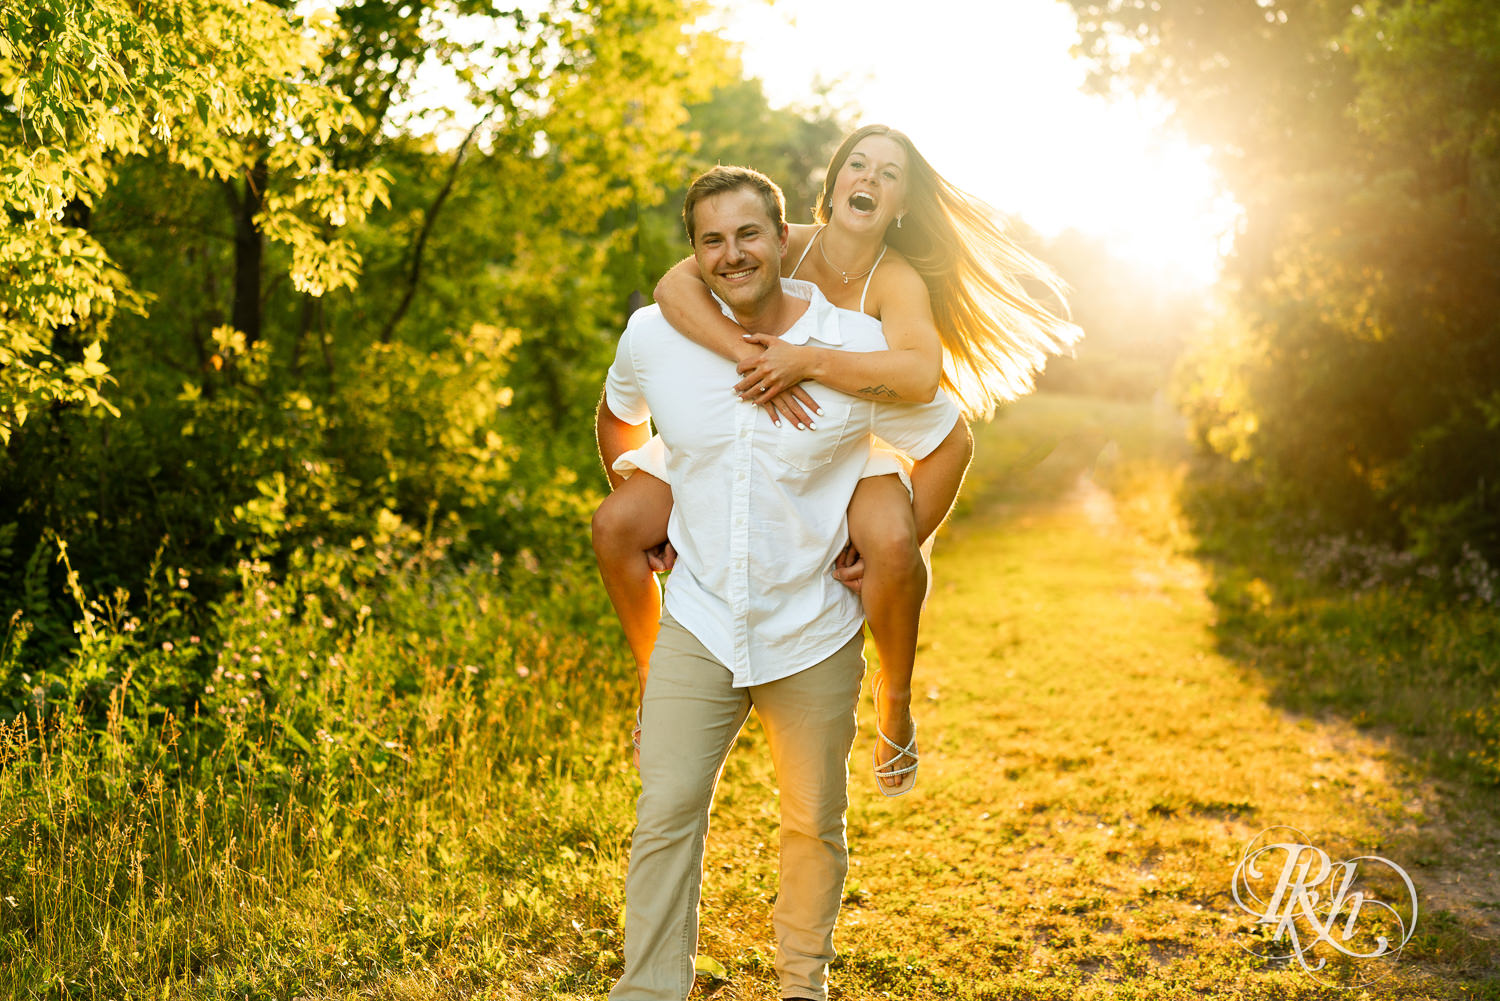 Man in white shirt carries woman in white dress on back during golden hour engagement photography at Lebanon Hills in Eagan, Minnesota.